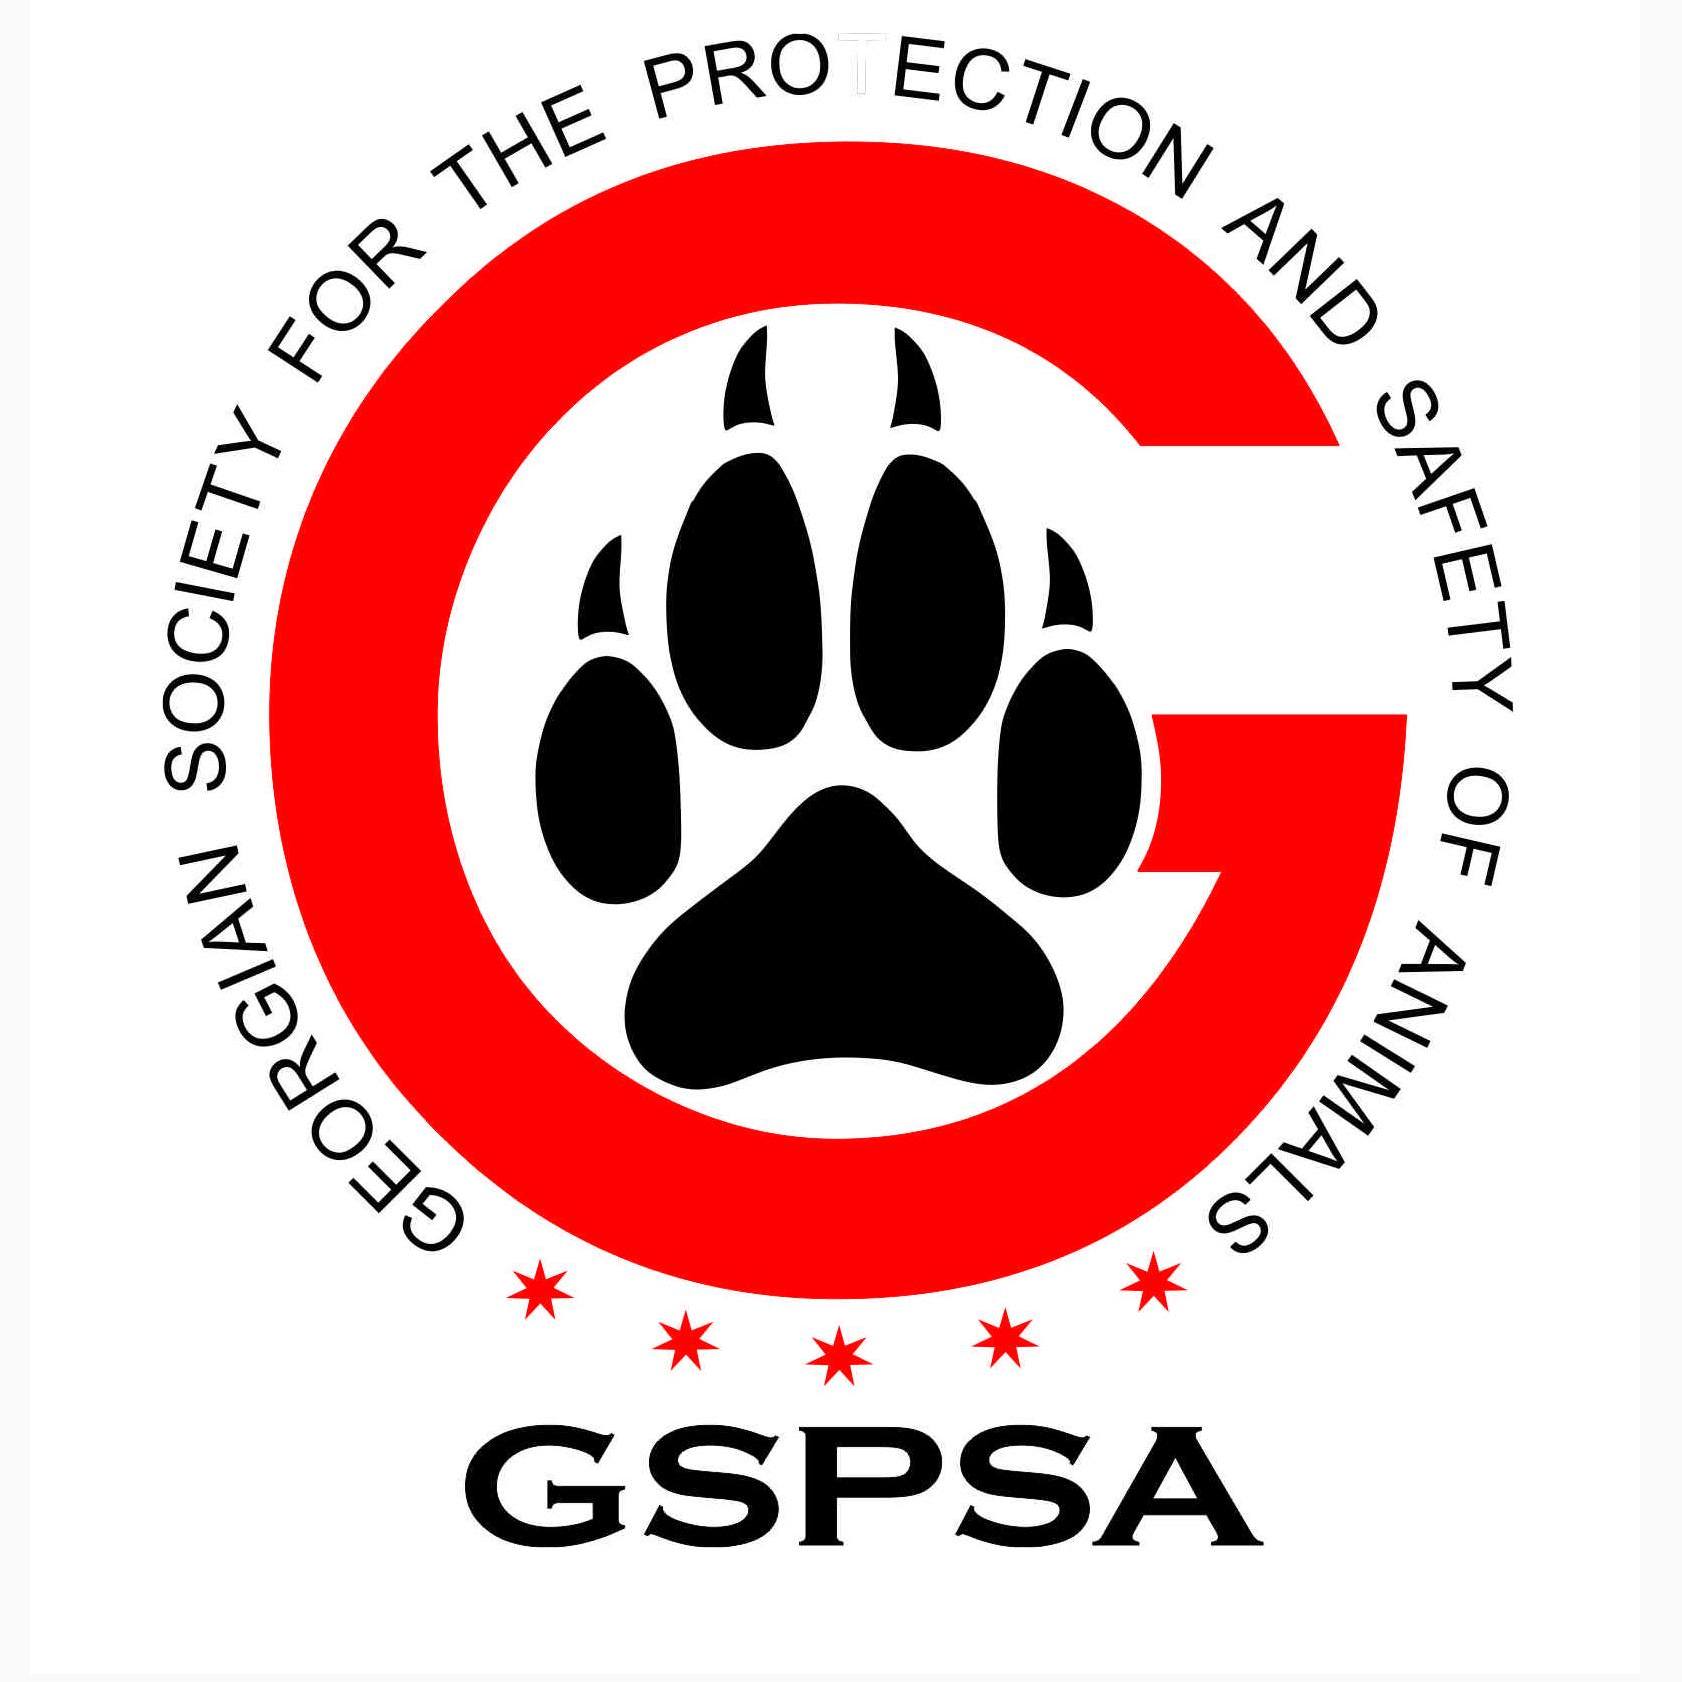 Georgian Society for the Protection and Safety of Animals (GSPSA)